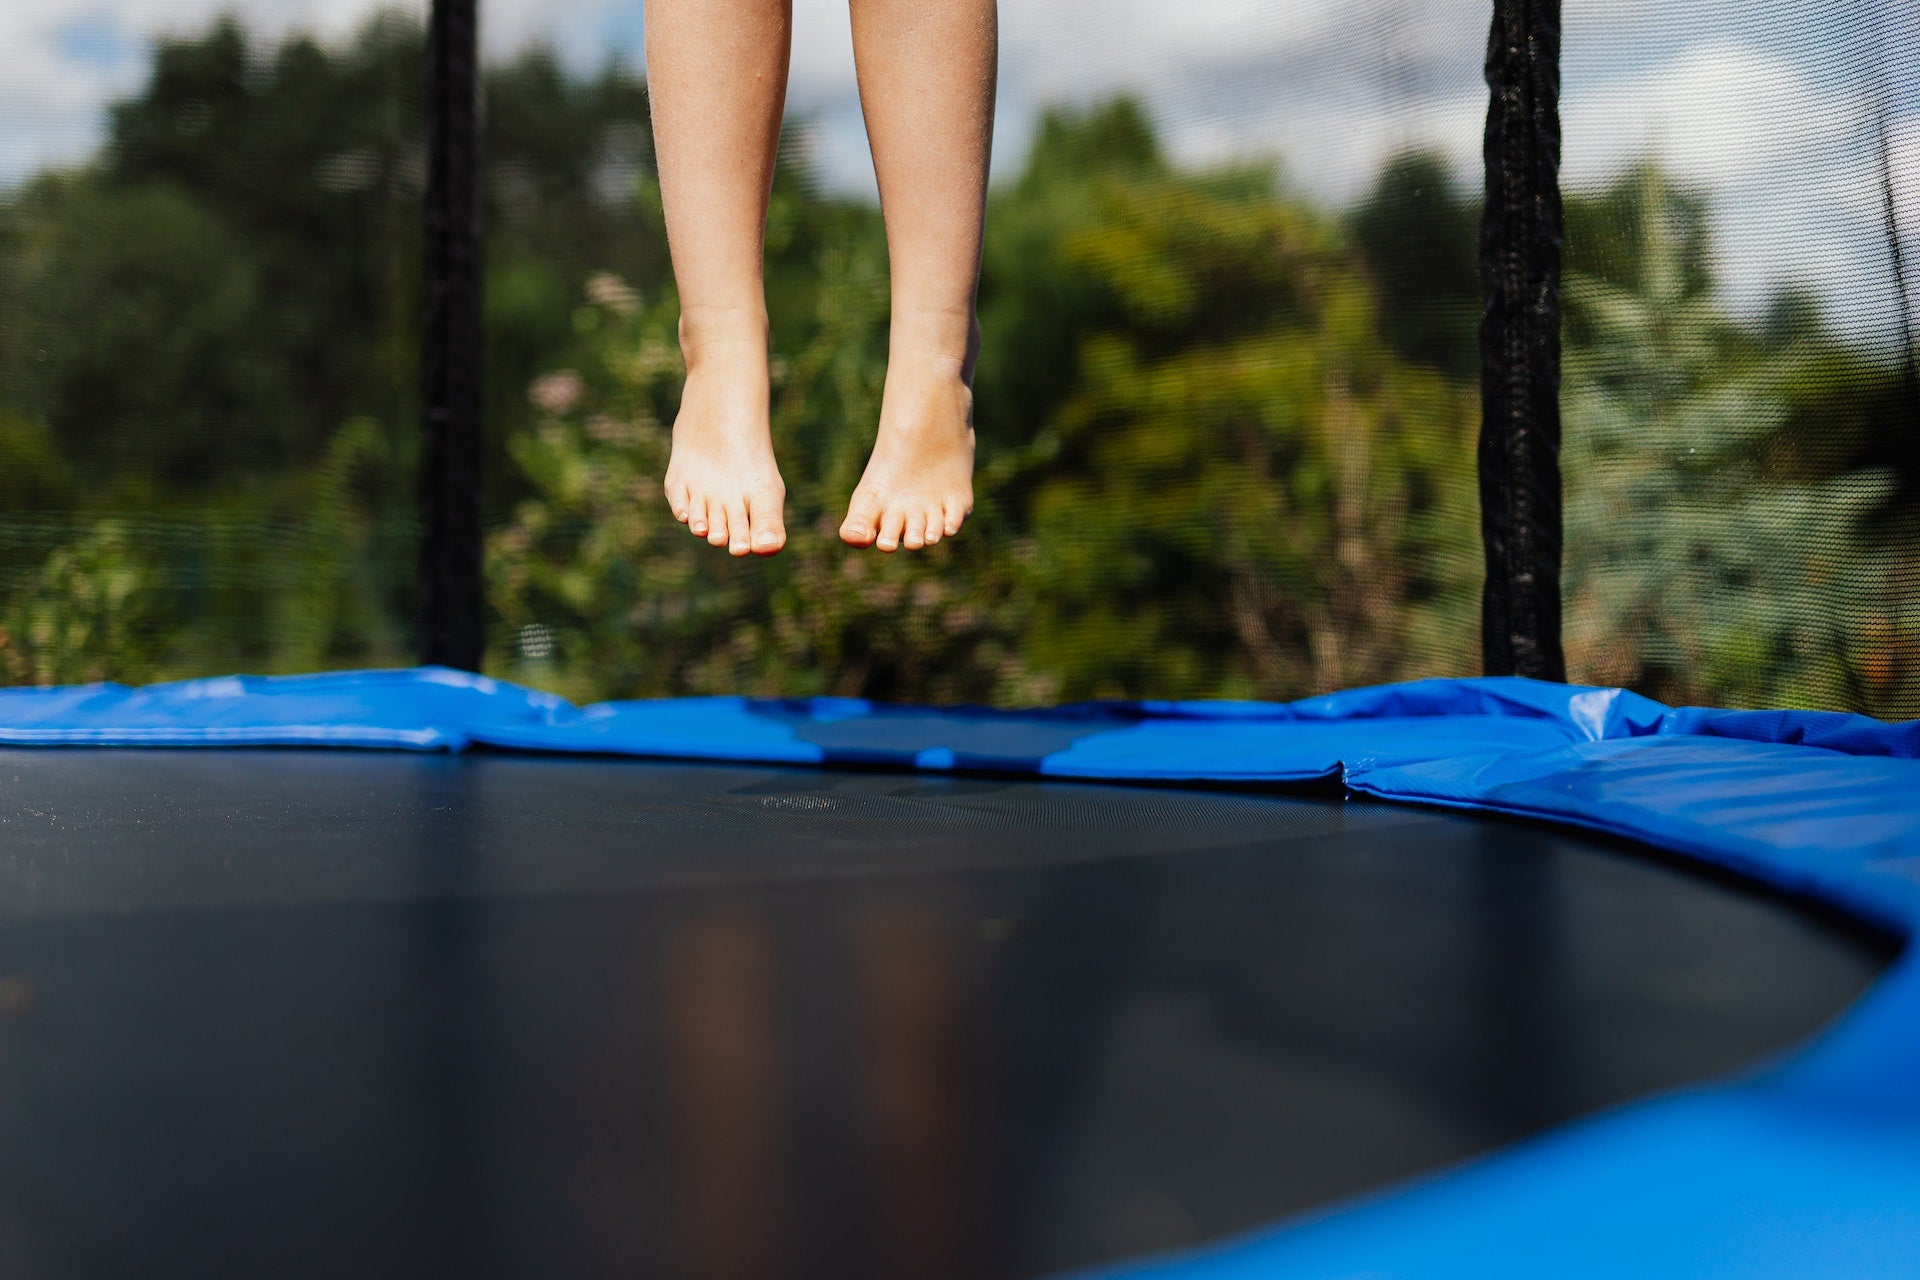 Safety tips and precautions when using a trampoline